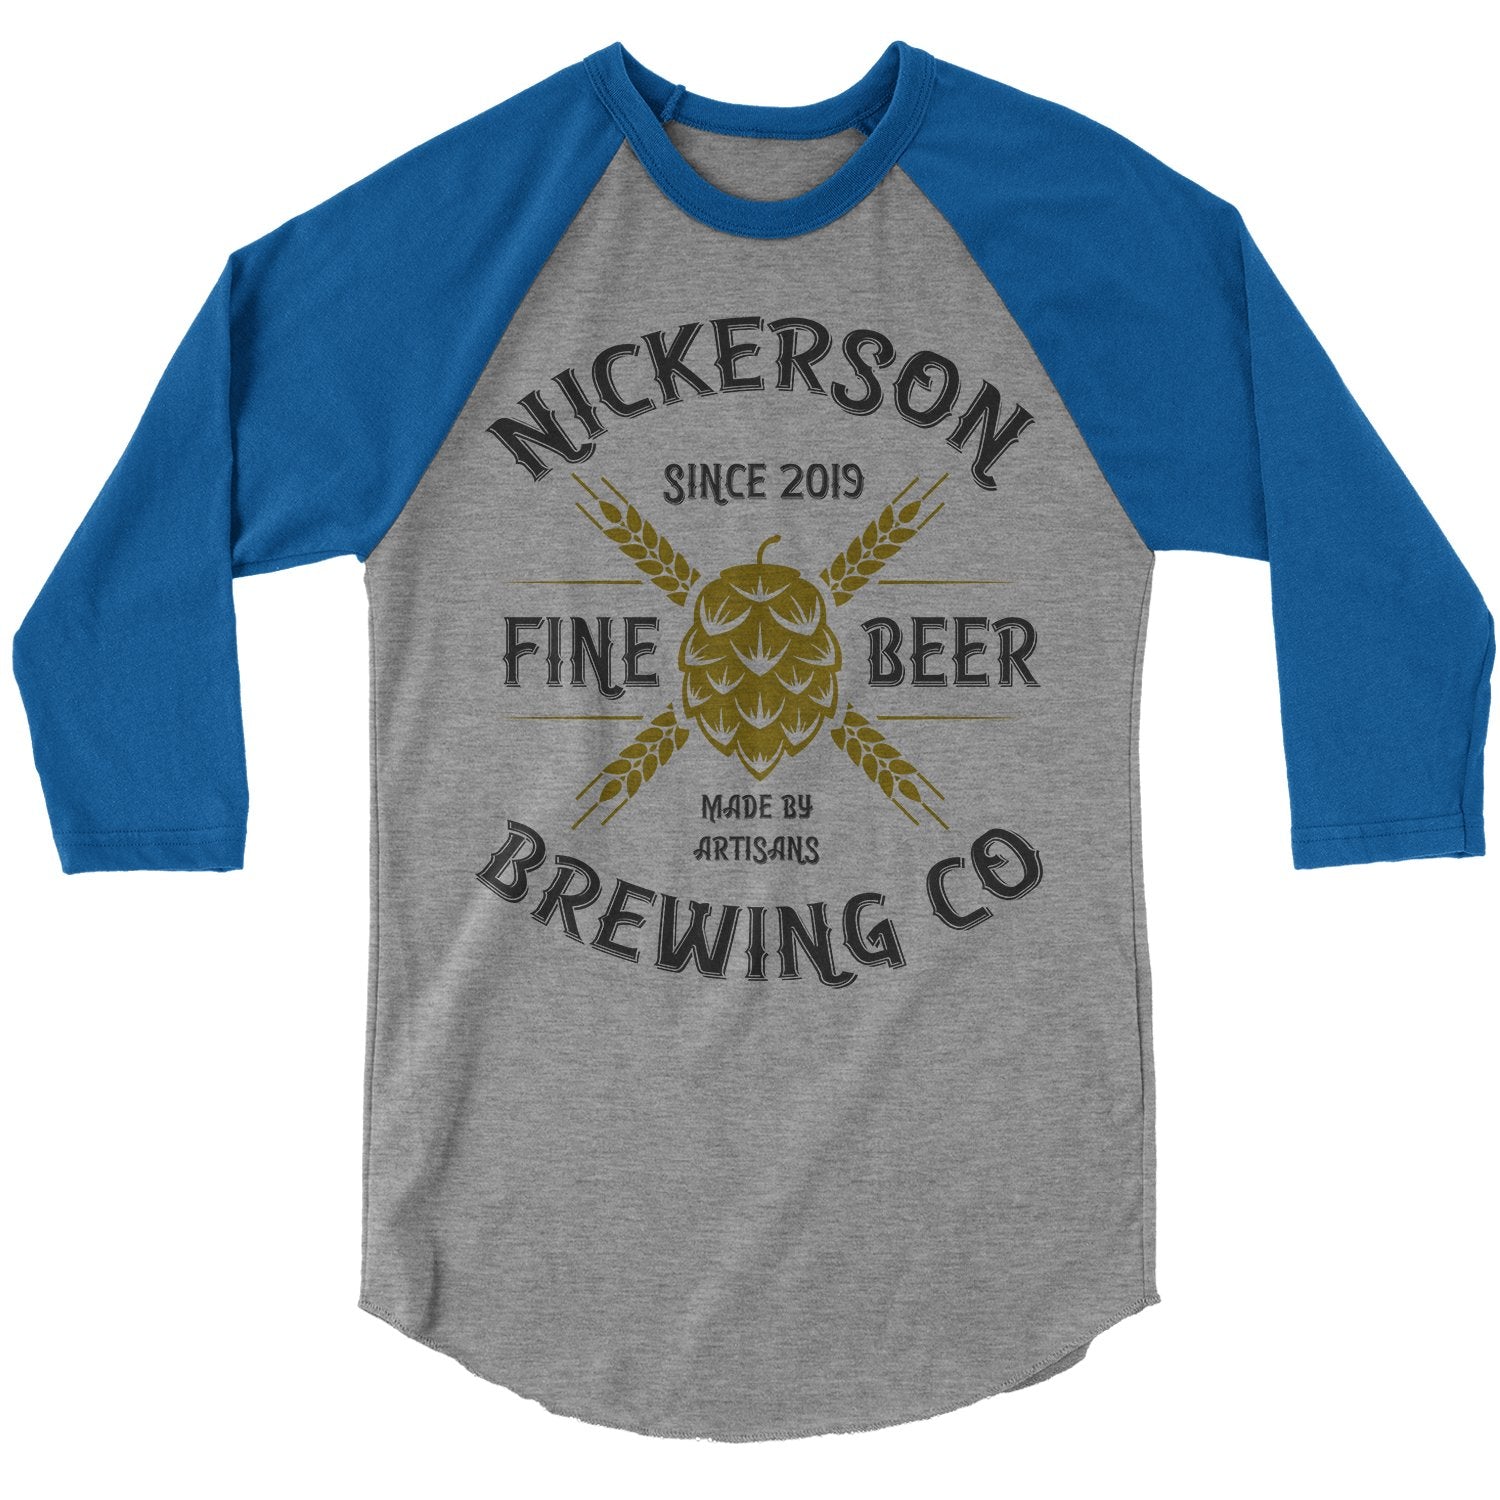 brewery t shirts for sale